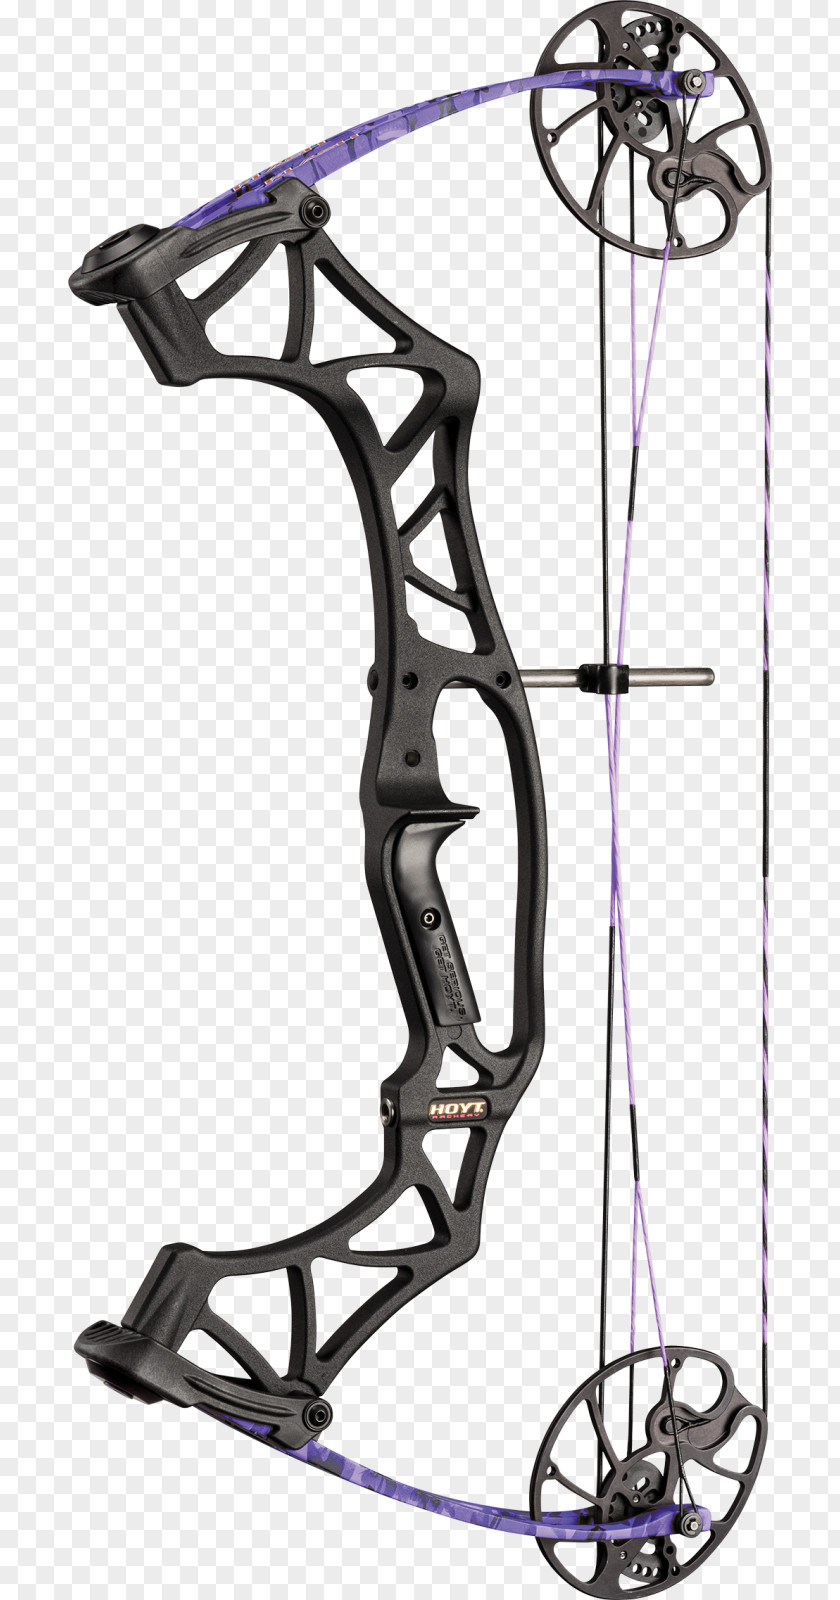 Kla Kila Compound Bows Archery Bow And Arrow Bowhunting PNG